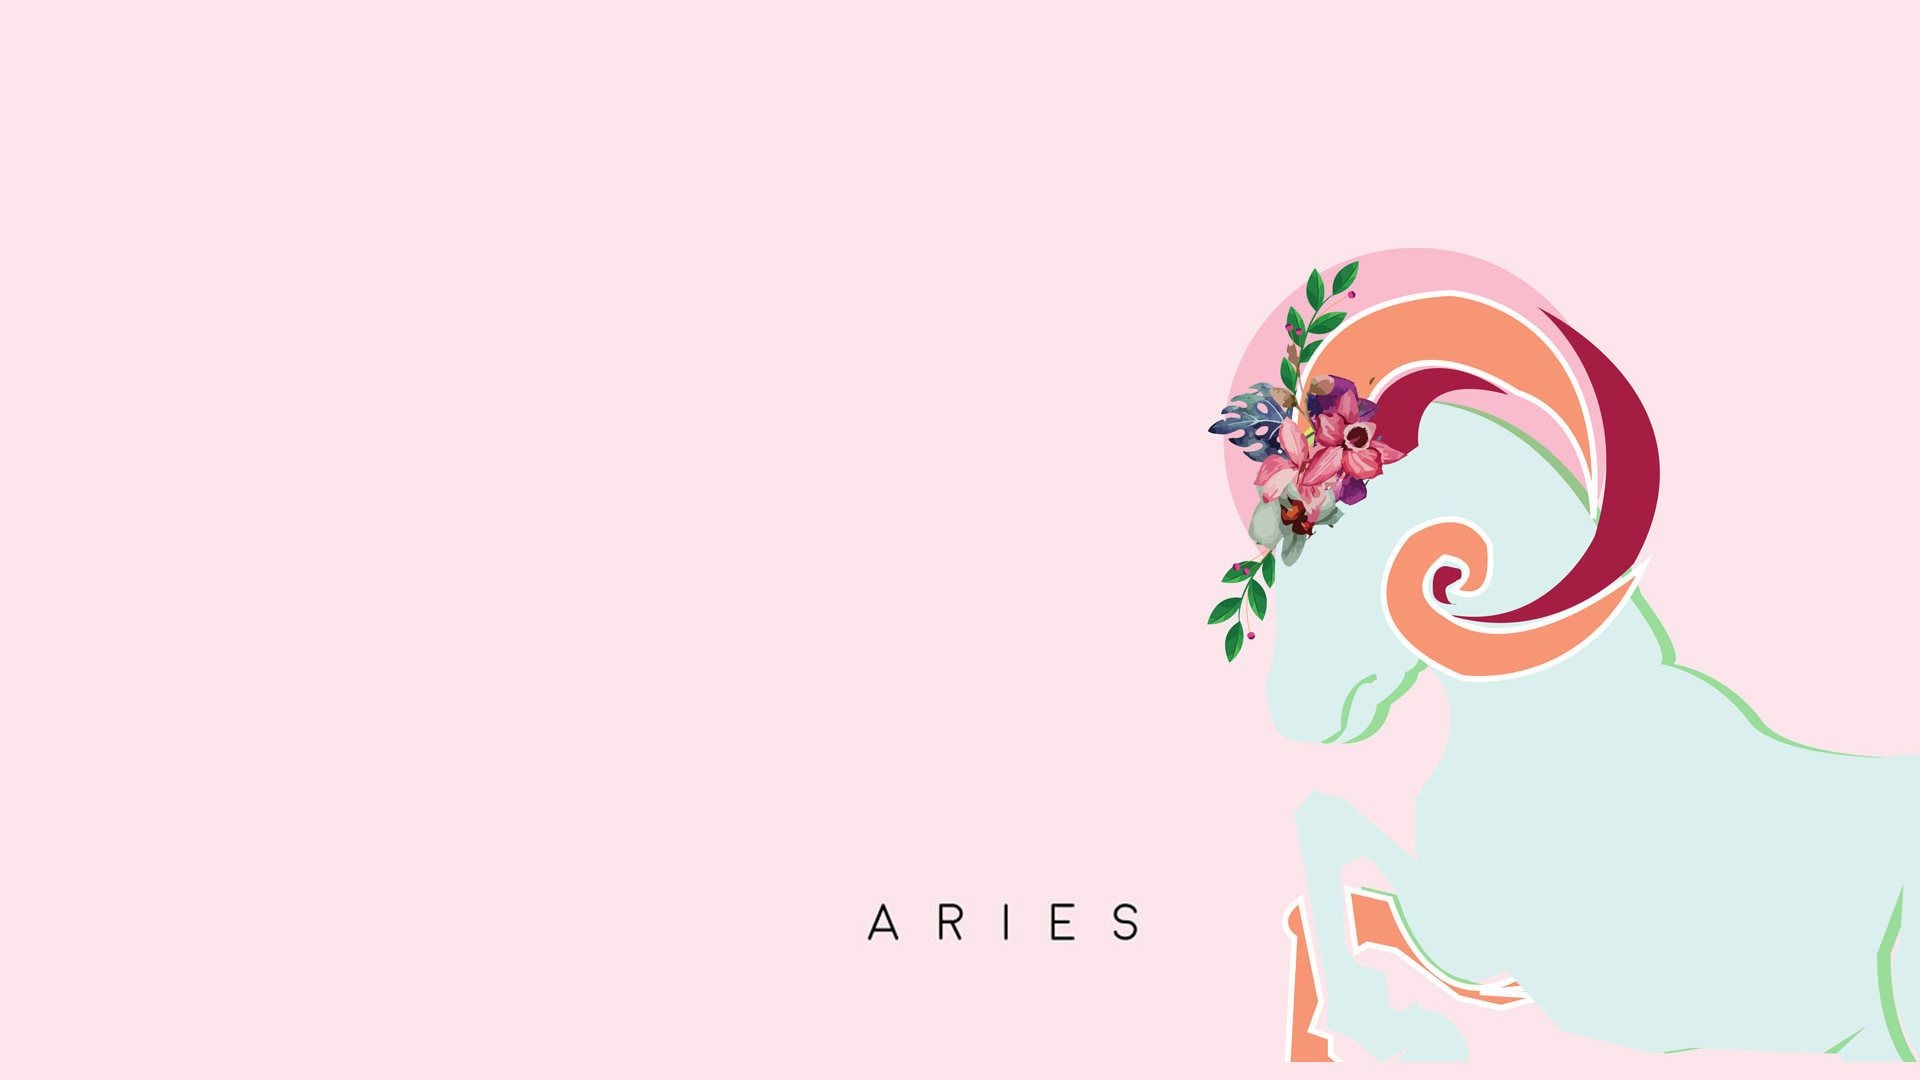 HD wallpaper, Aries Backgrounds, Aries Symbol Wallpapers, 1920X1080 Full Hd Desktop, Desktop Full Hd Aries Zodiac Sign Background